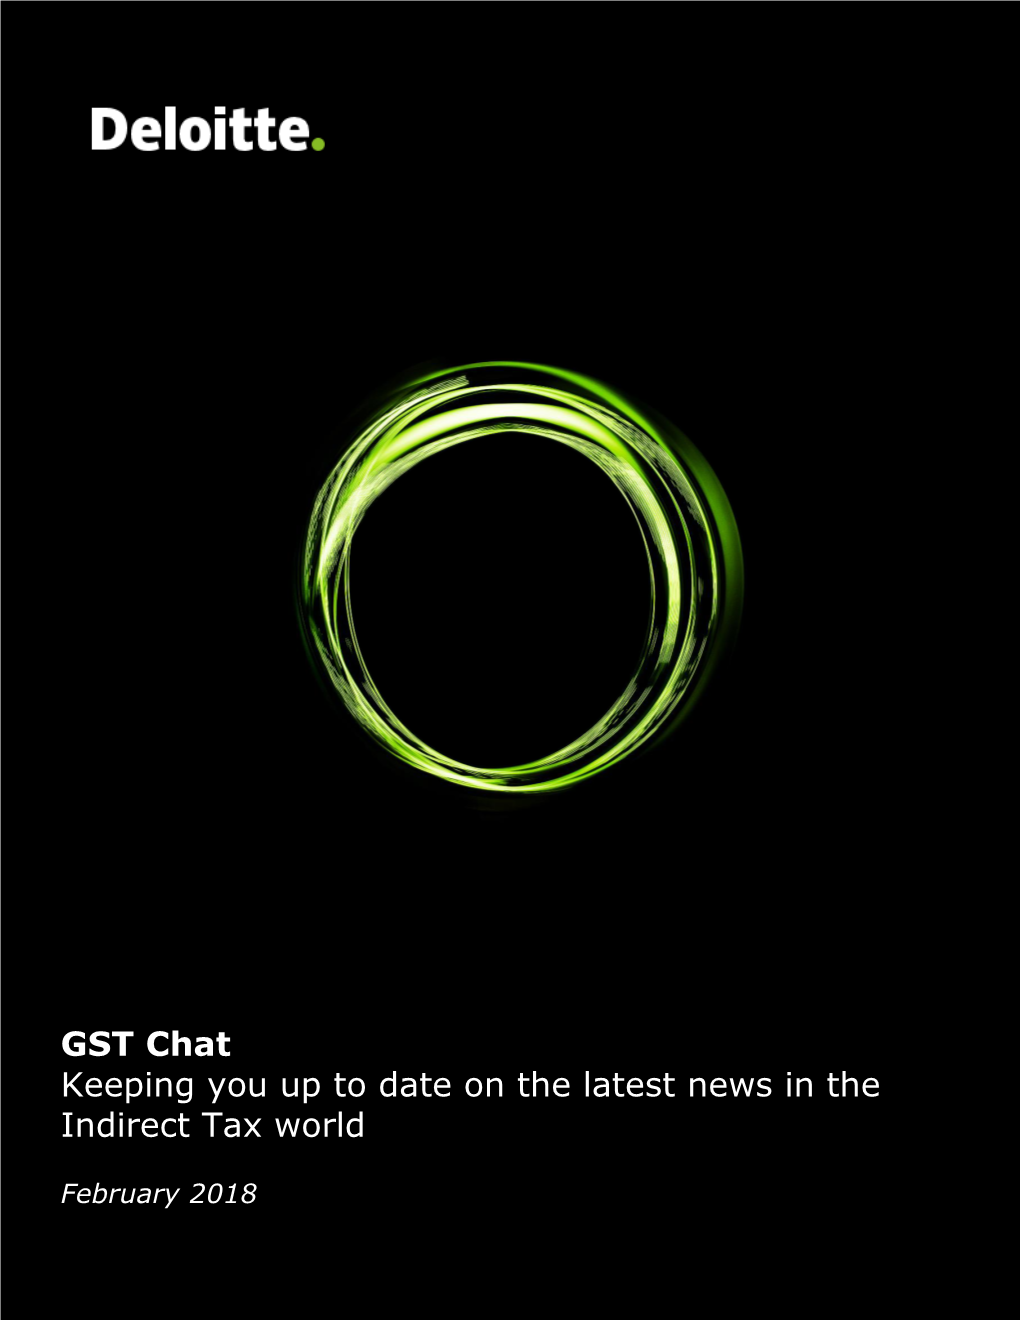 GST Chat Keeping You up to Date on the Latest News in the Indirect Tax World